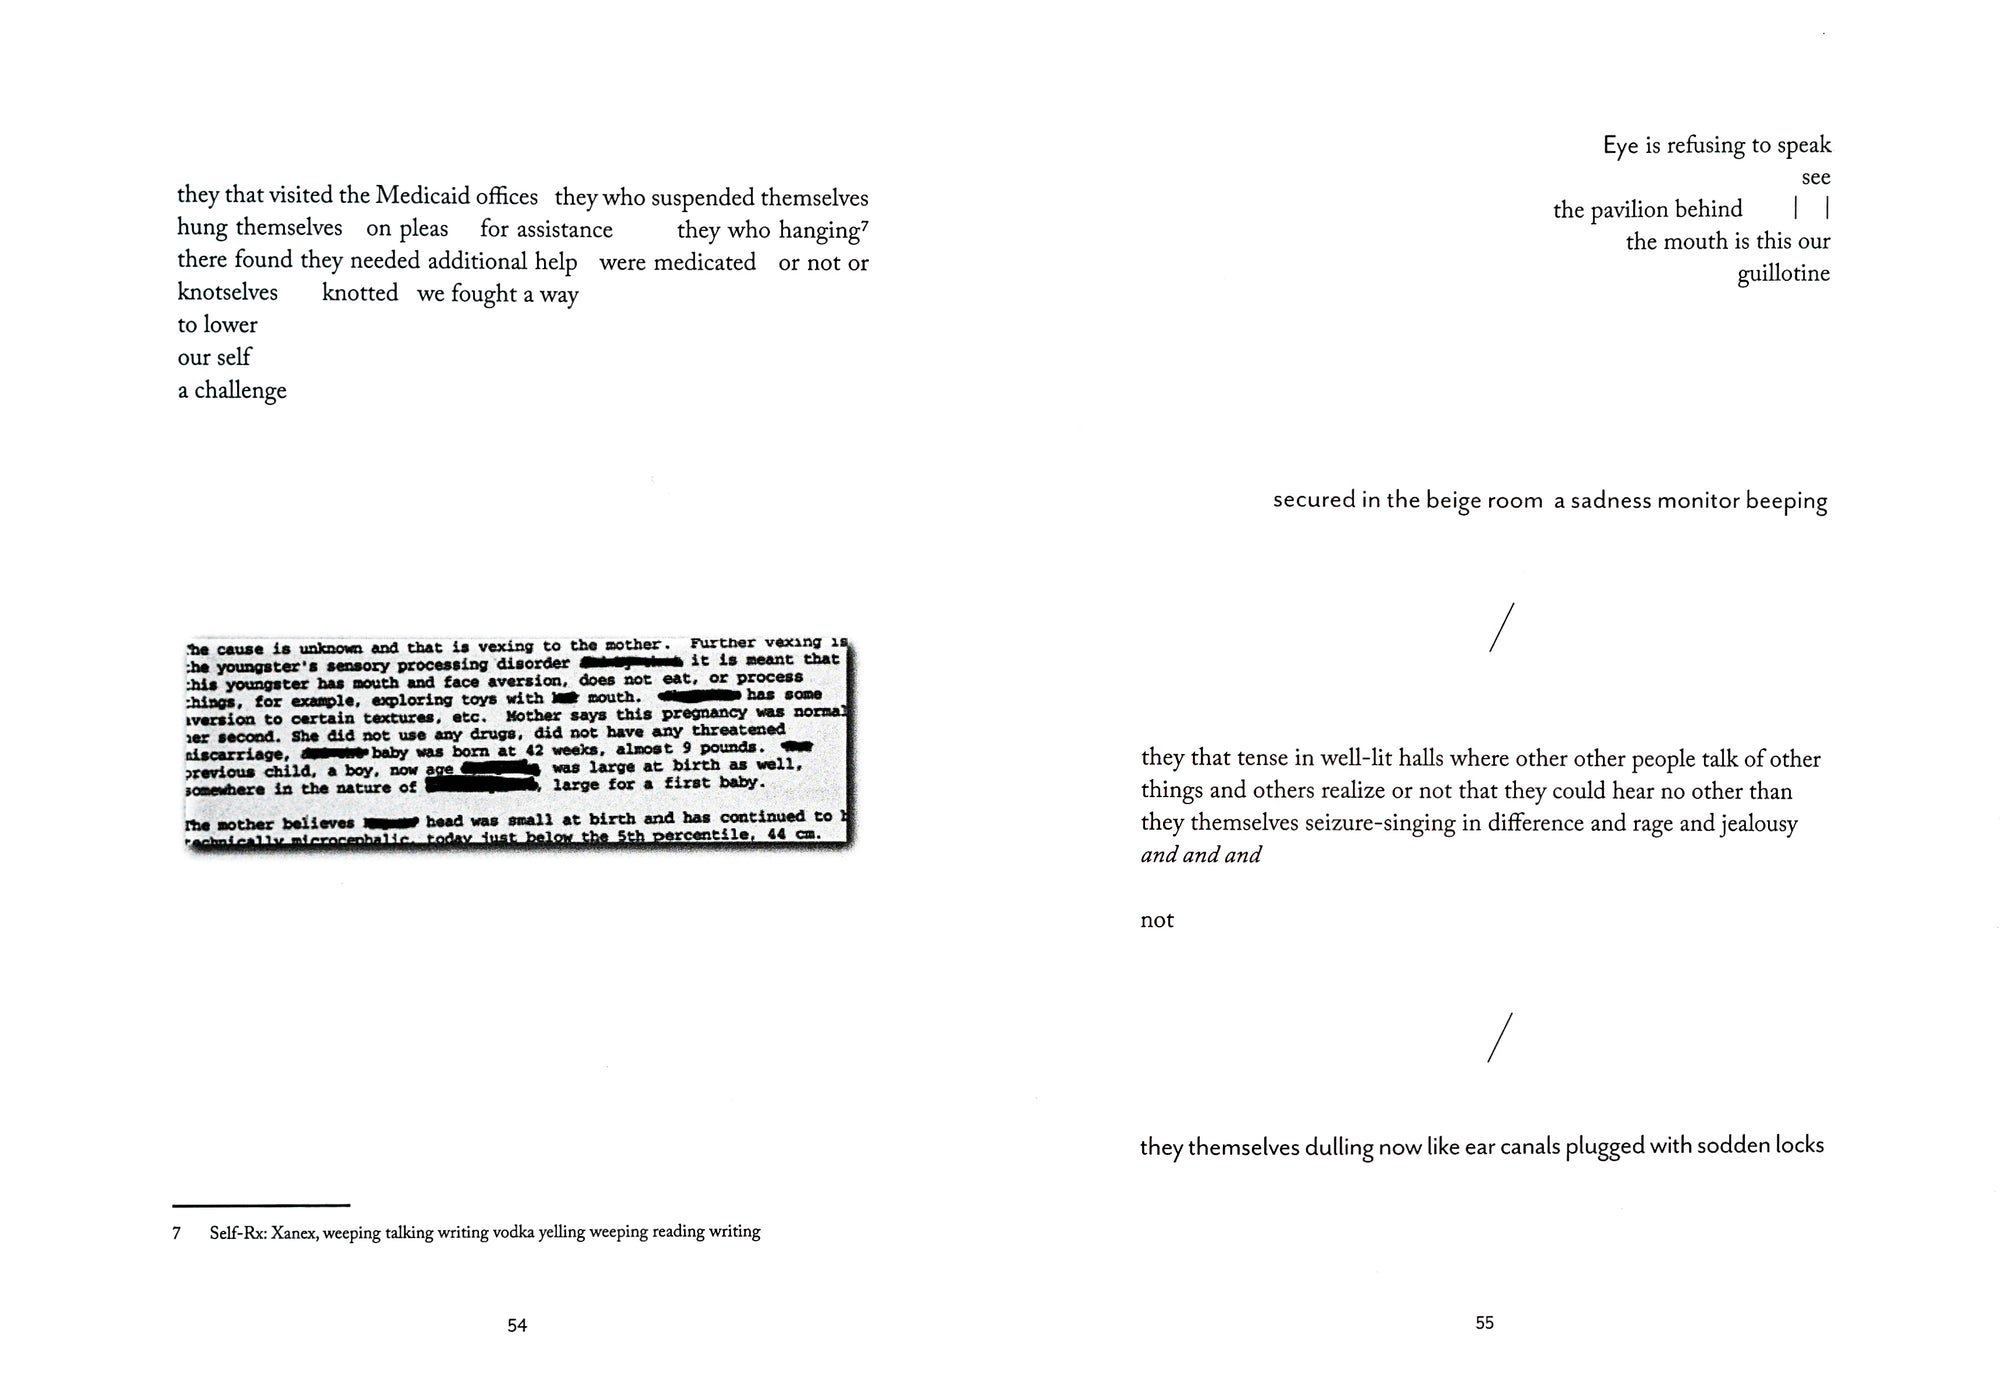 A spread depicting bits of flow text that are set with great distance in between. A cut-out from another text with some words blacked out sits on the left side of the spread.